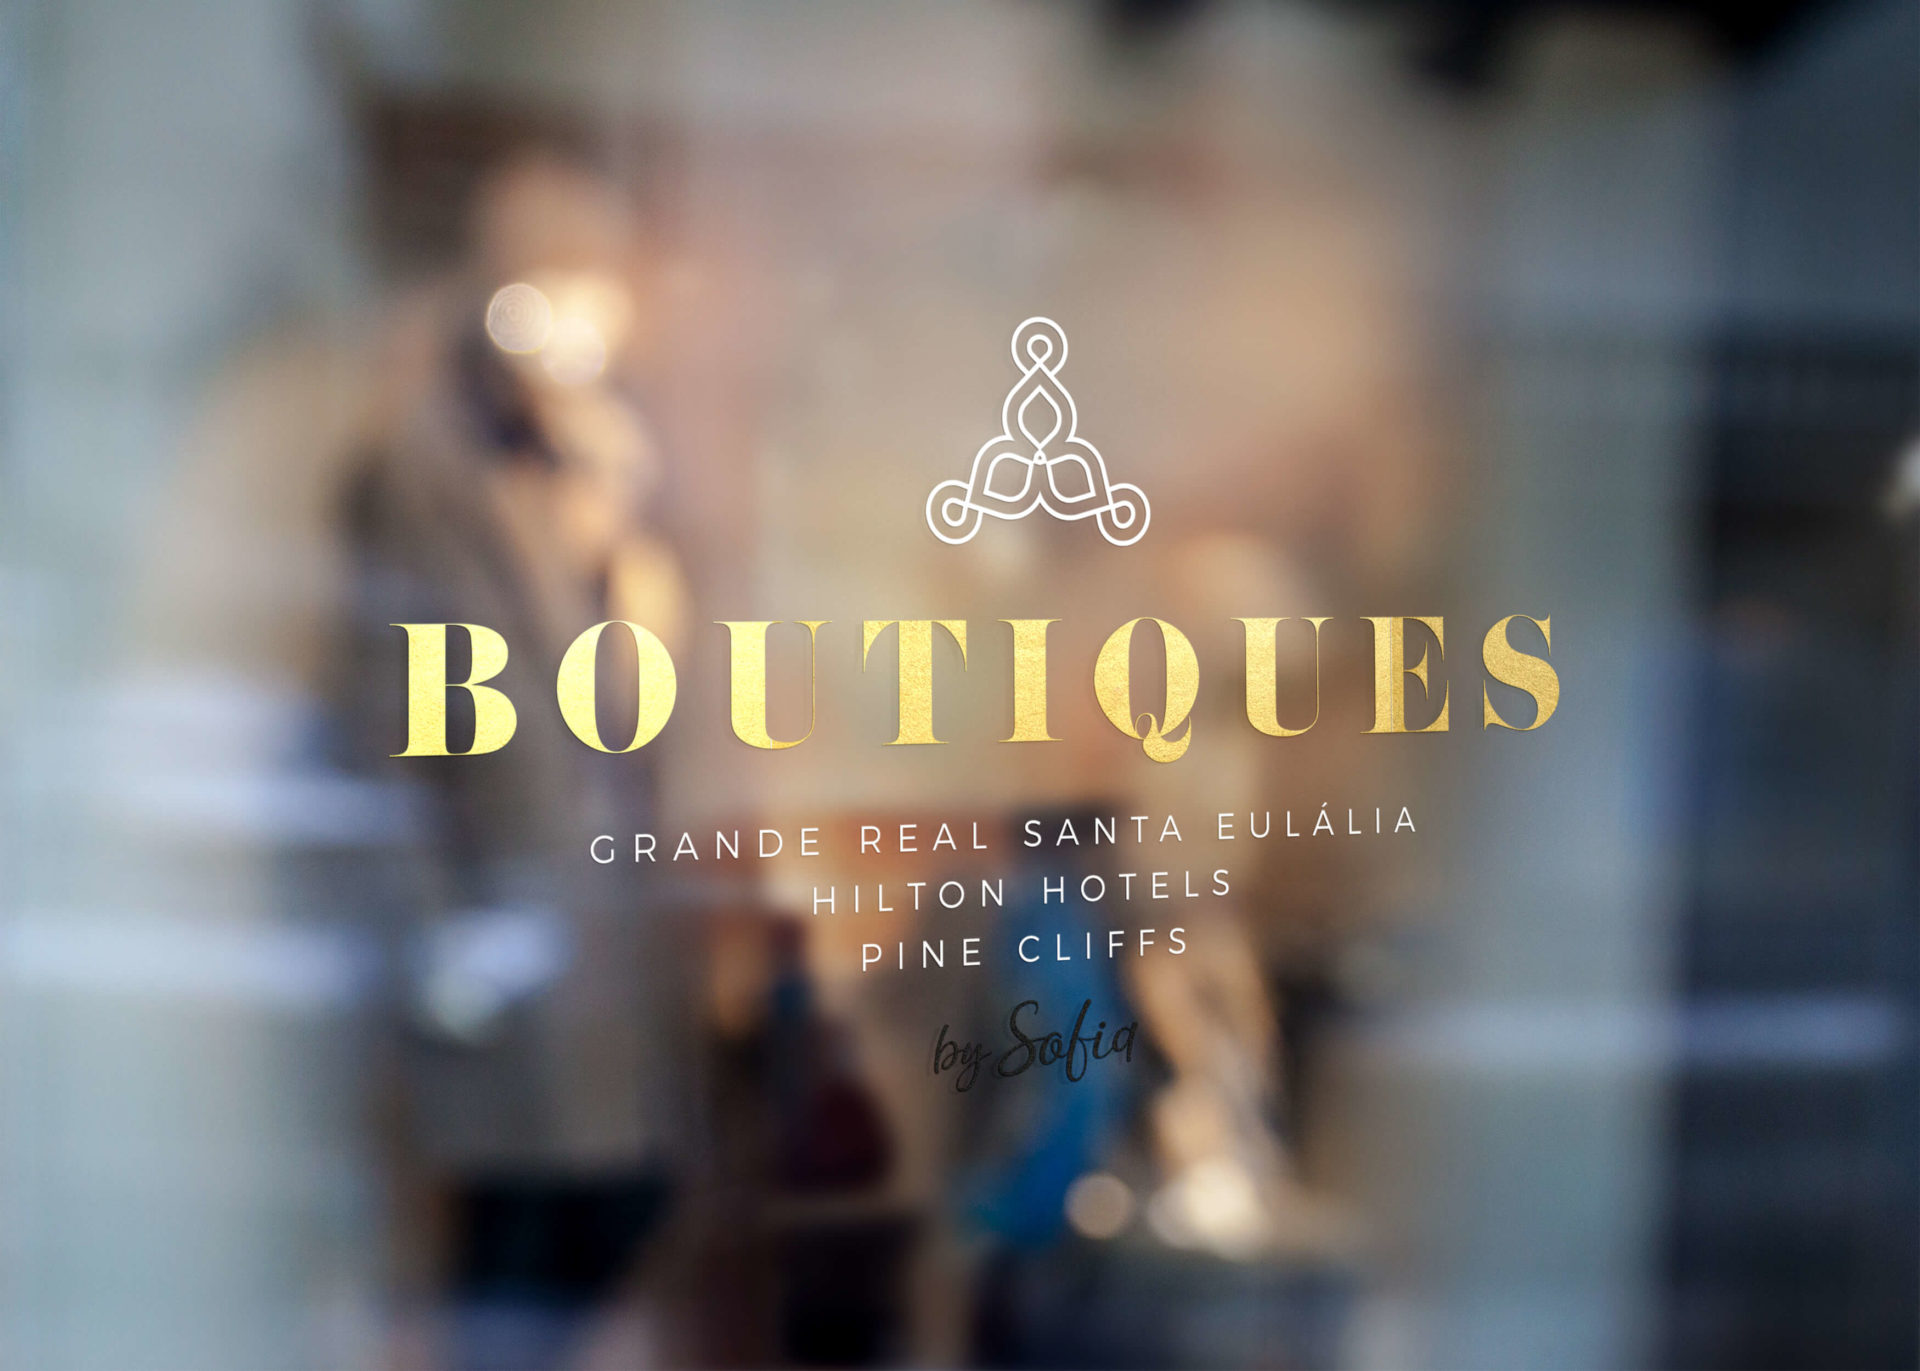 Boutiques by Sofia